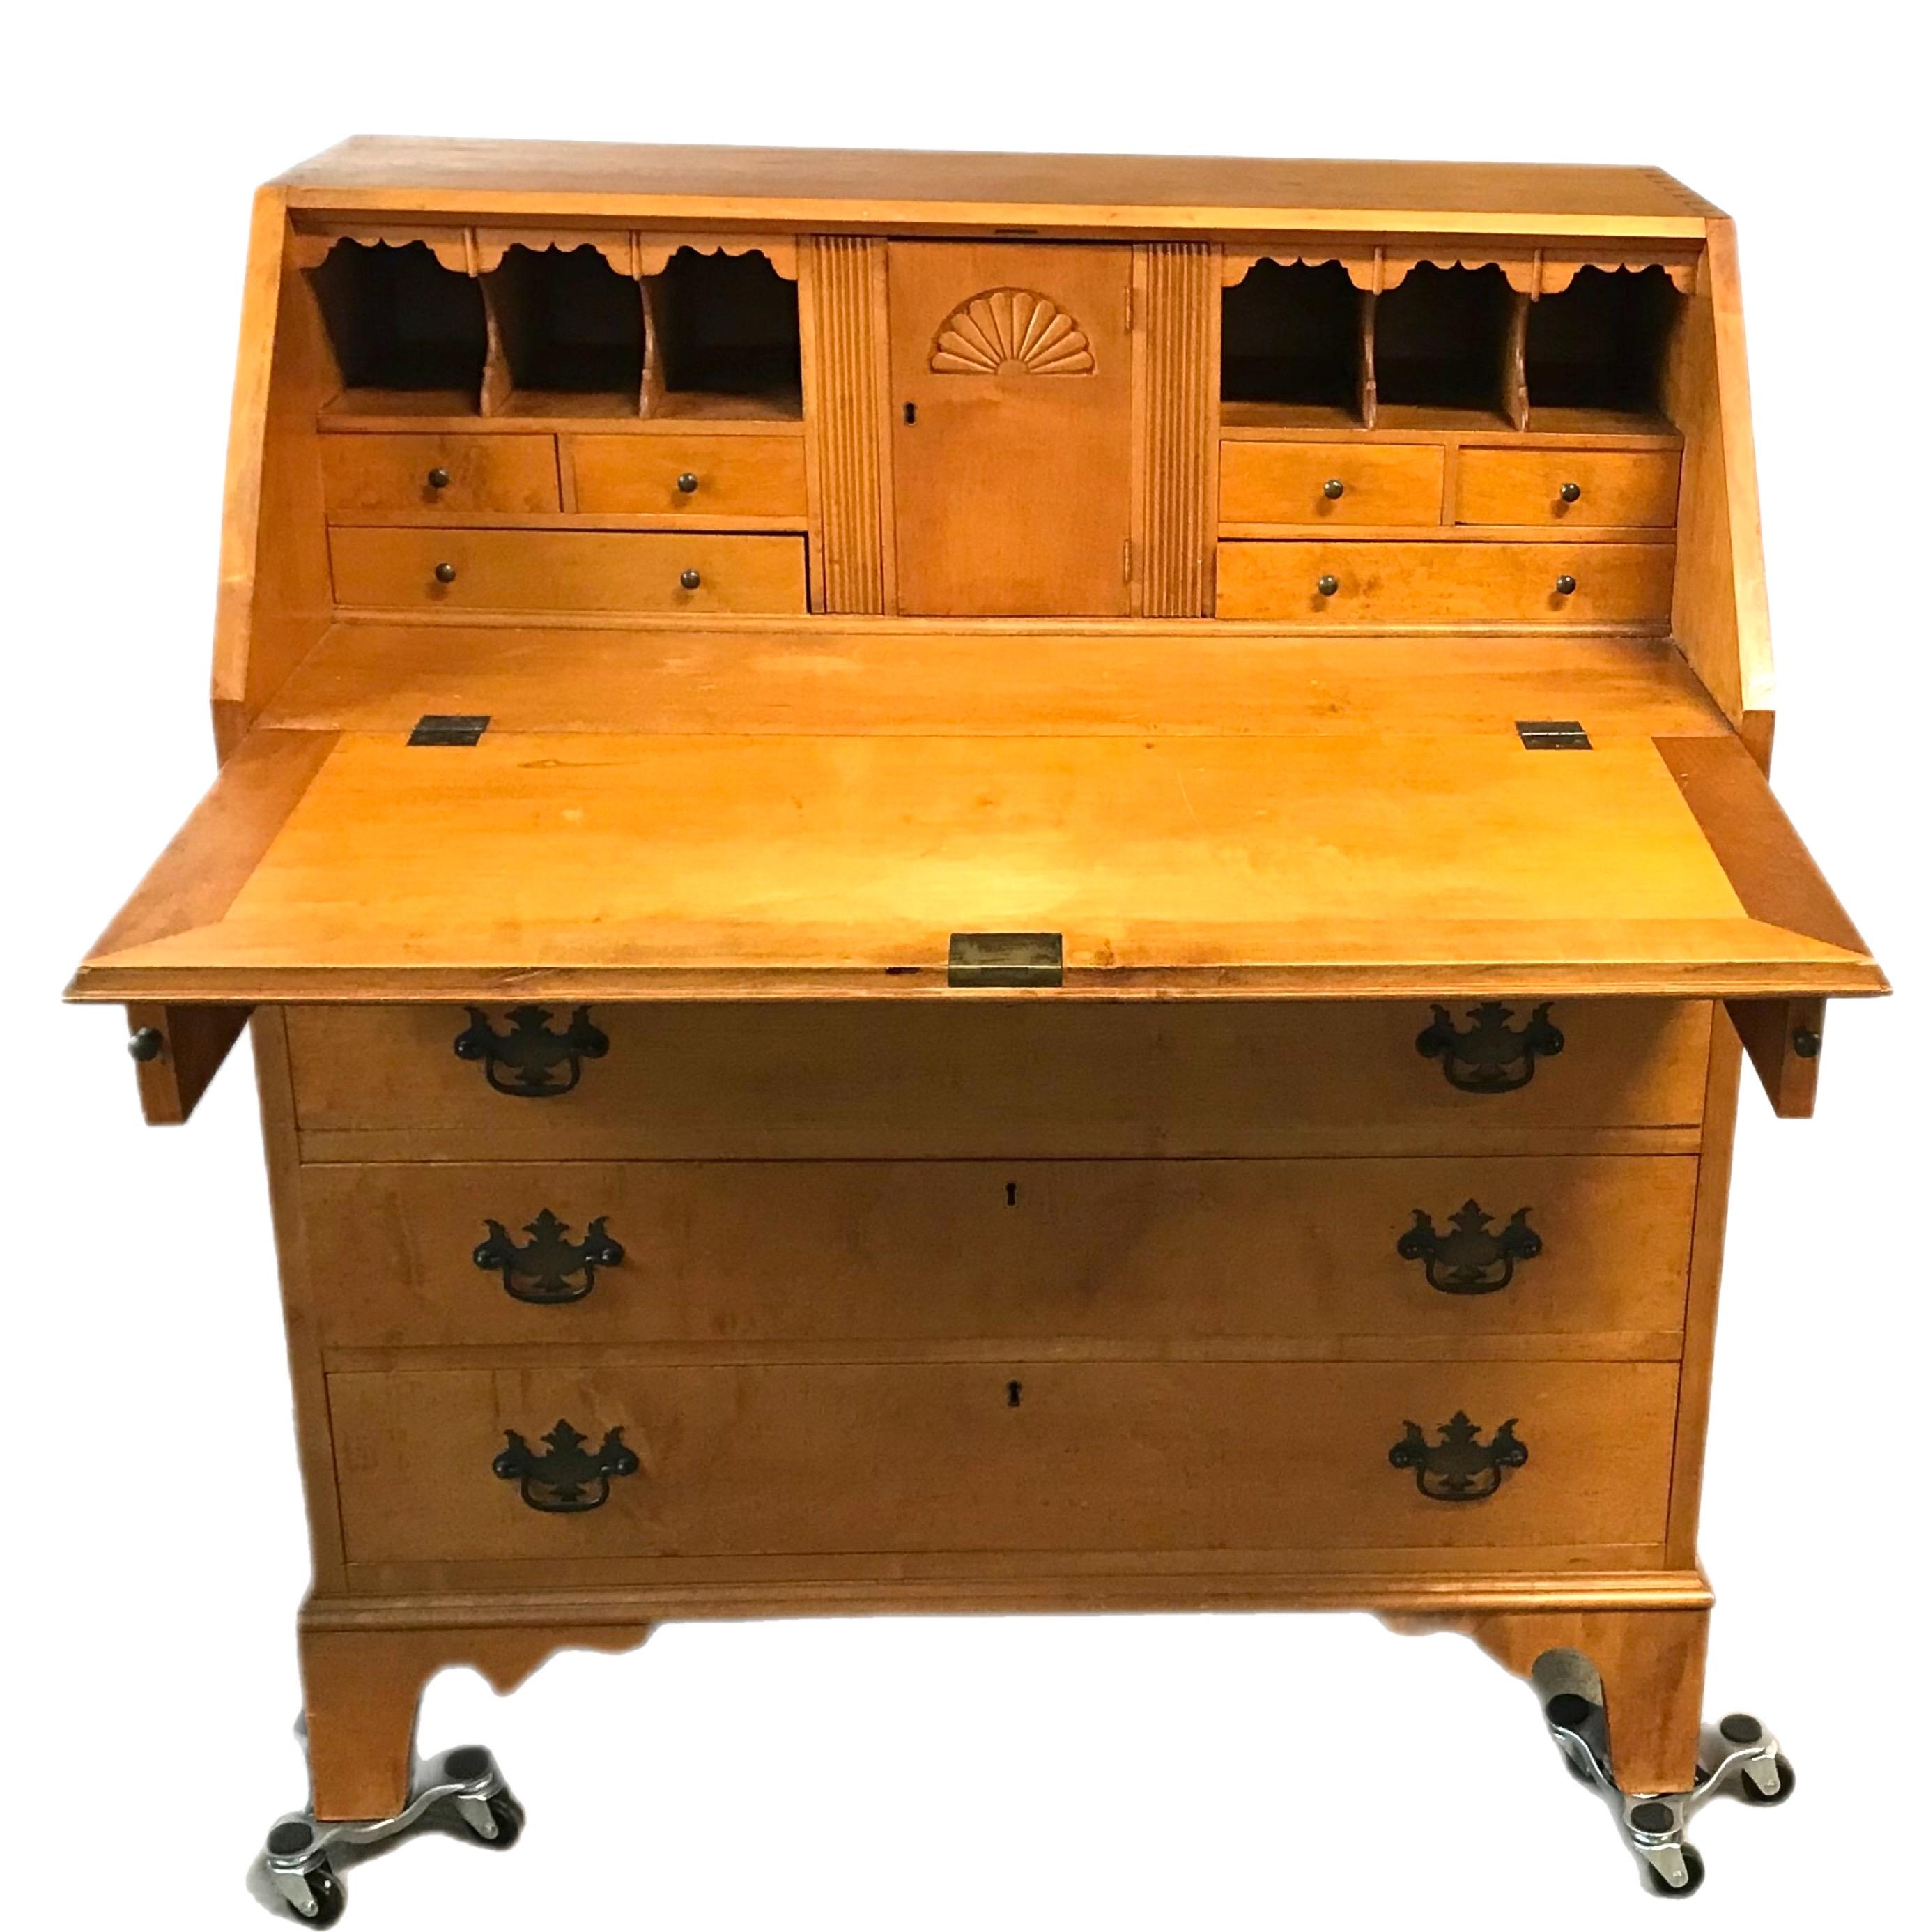 Beautifully crafted antique 4 drawer slant front desk. The exterior is in very nice original condition, the secondary woods have all been replaced with an eye to detail with dovetailing construction.